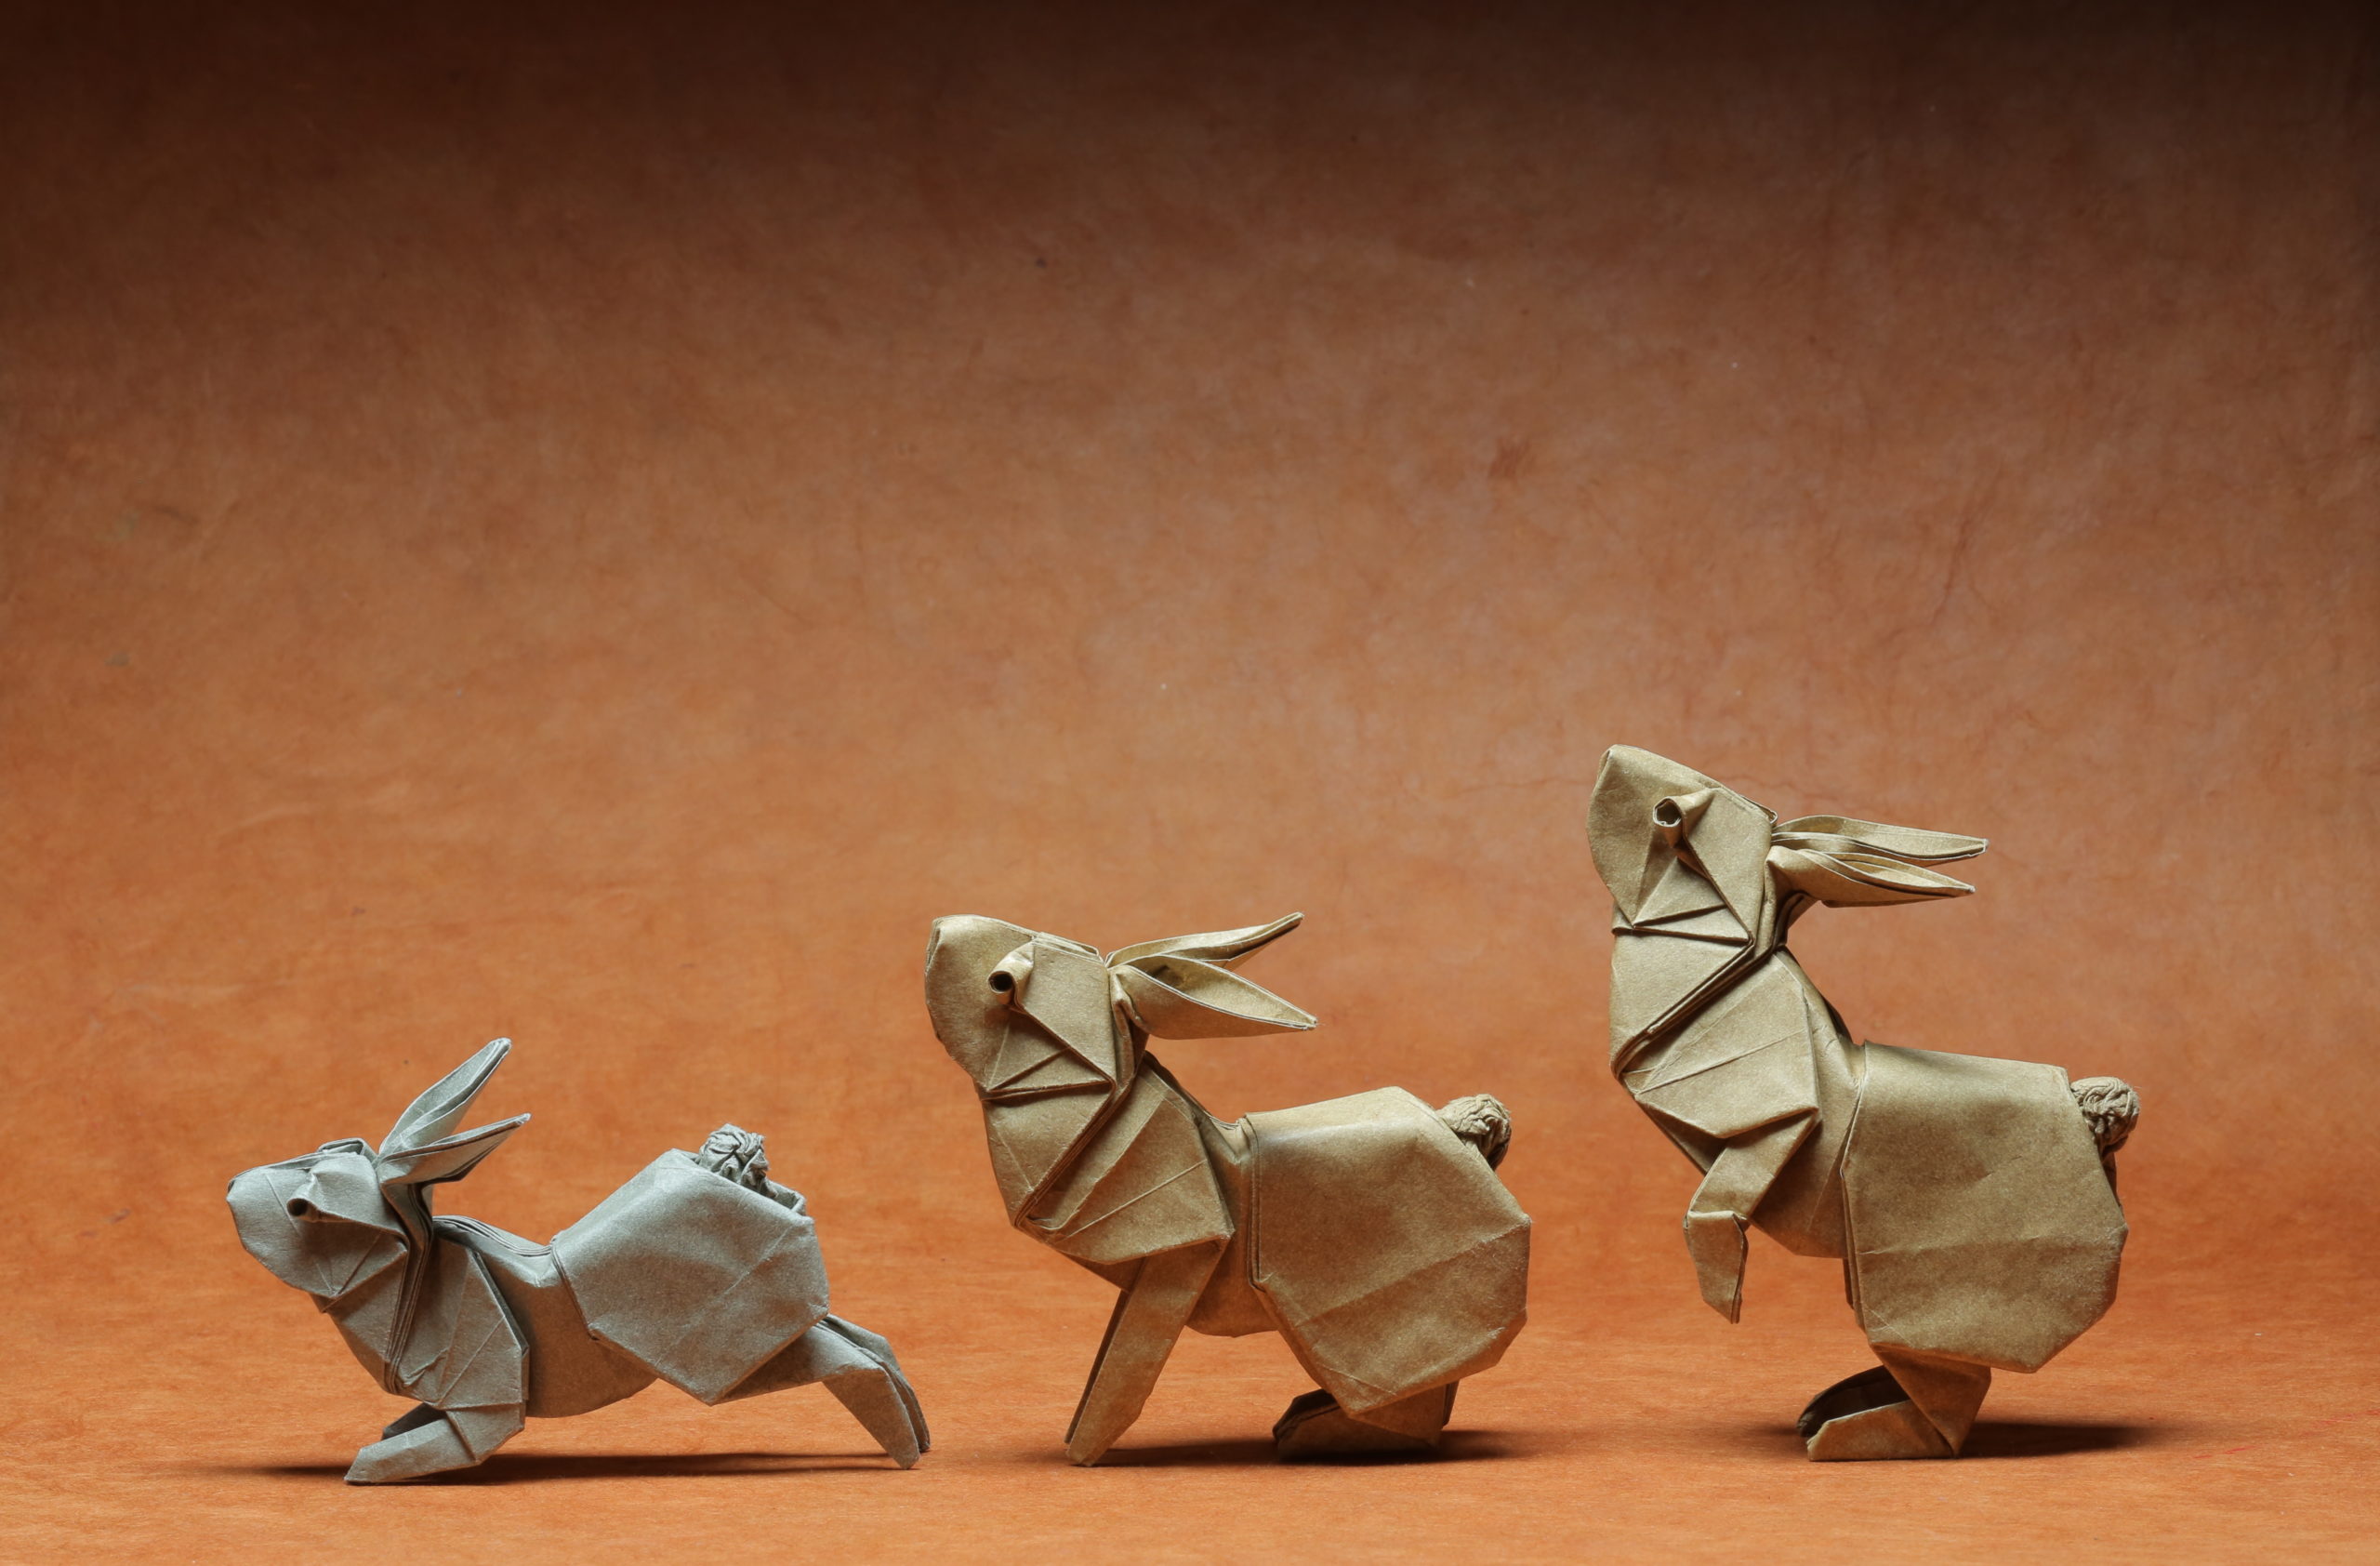 17 Pieces Of Origami From A Huge New Show About Paper Folding